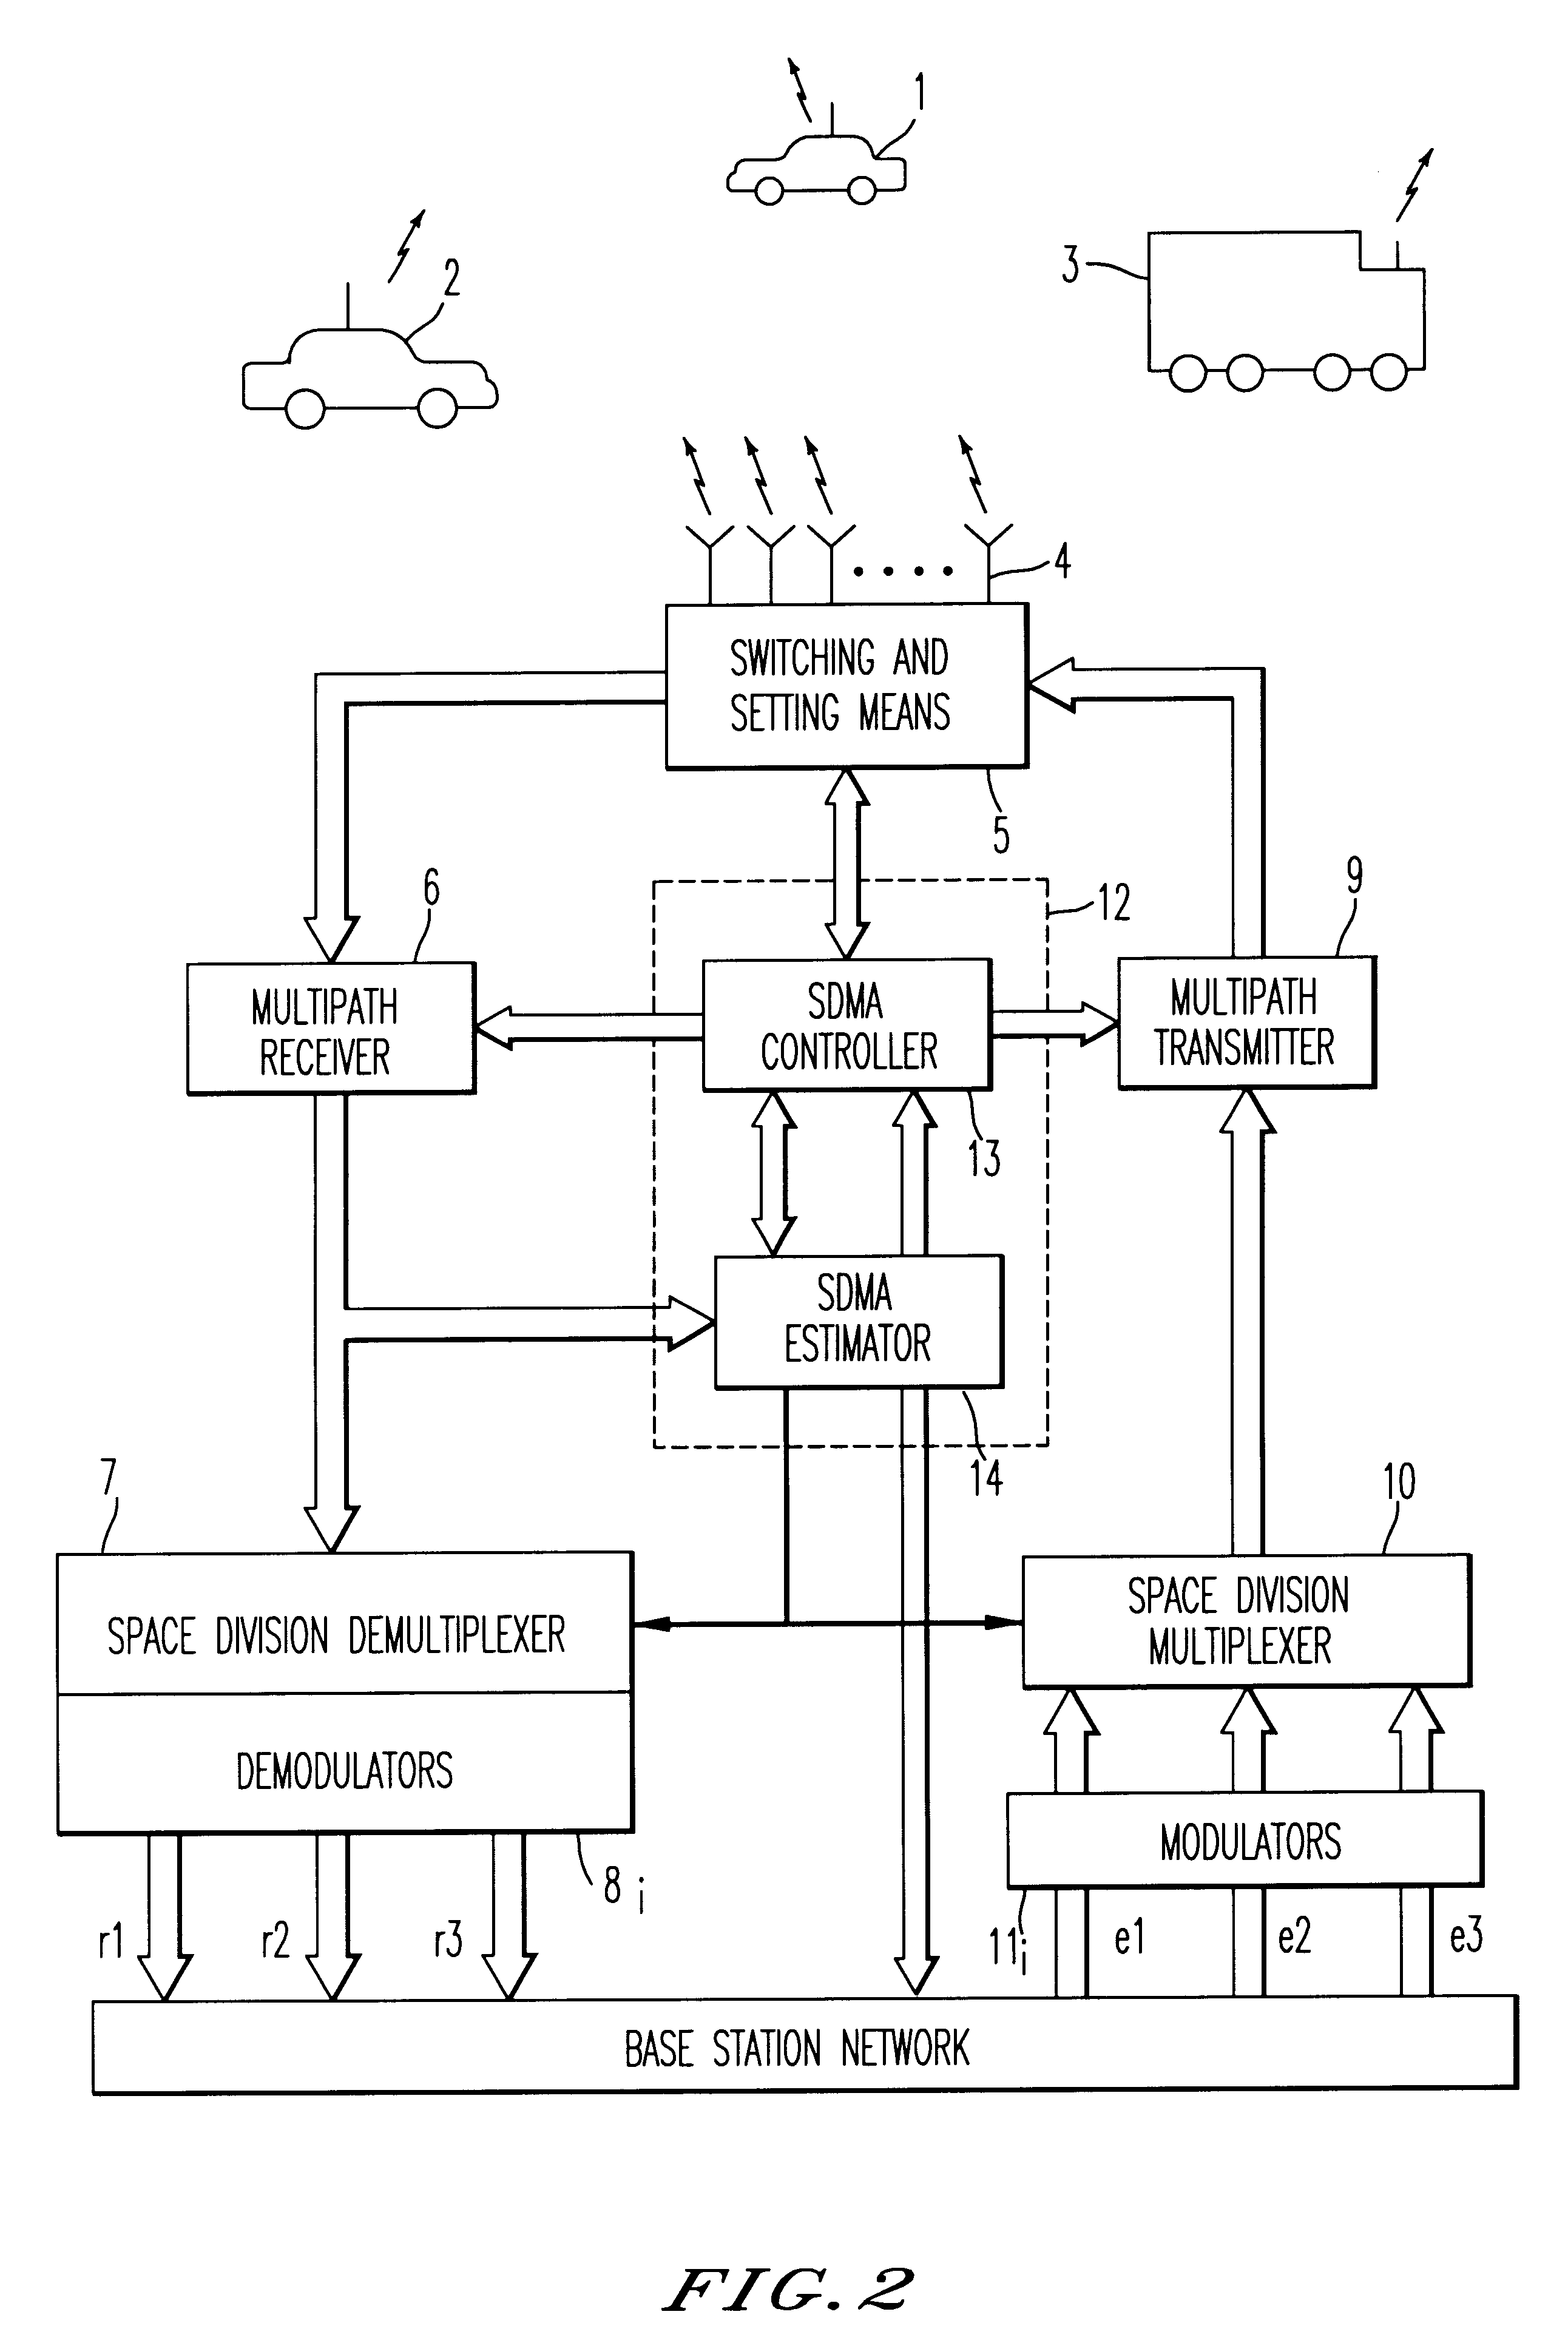 Method and device for space division multiplexing of radio signals transmitted in cellular radio communications